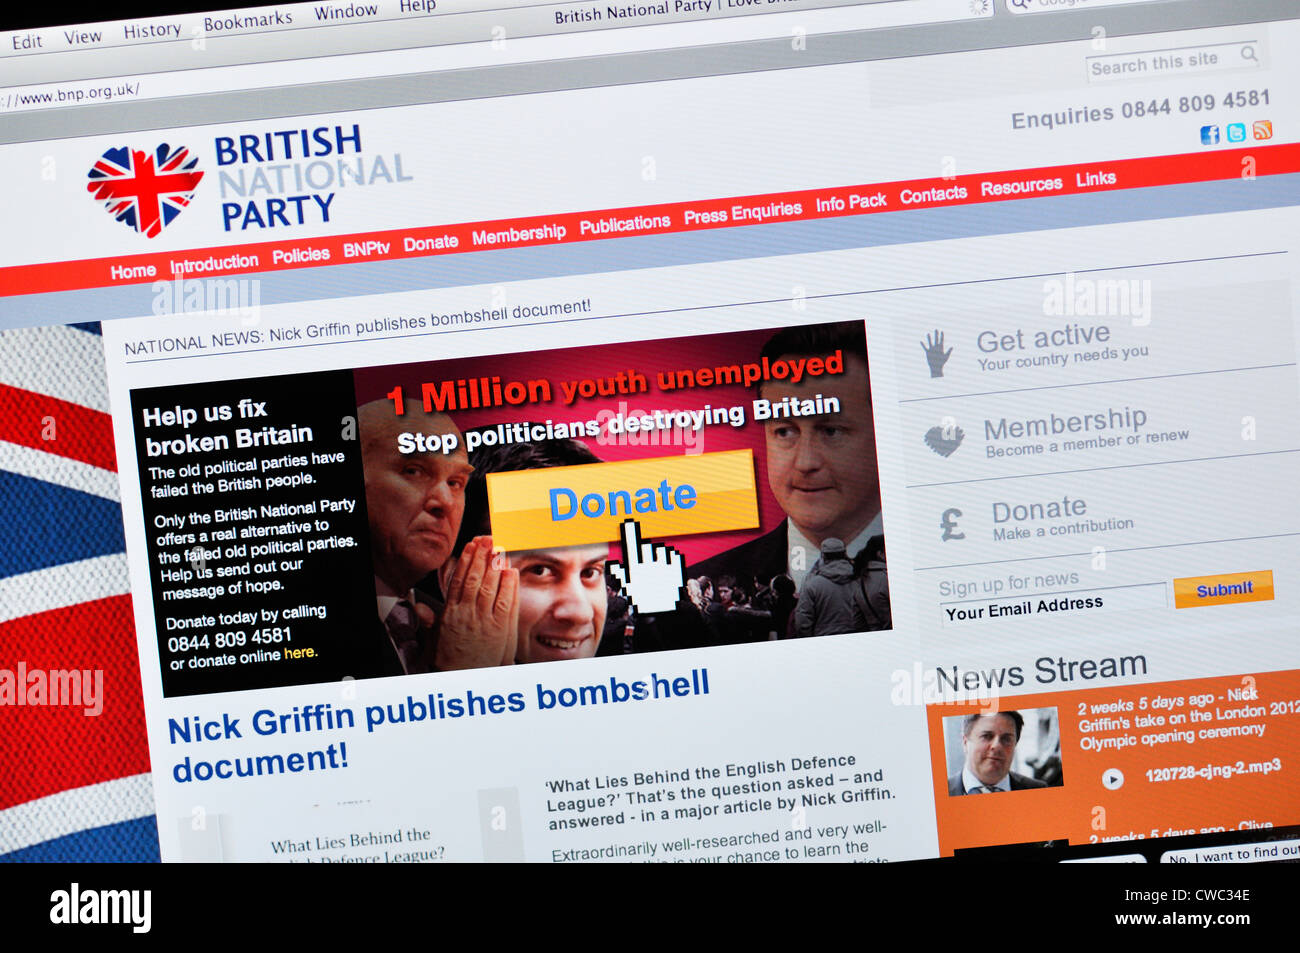 British National Party website Stock Photo